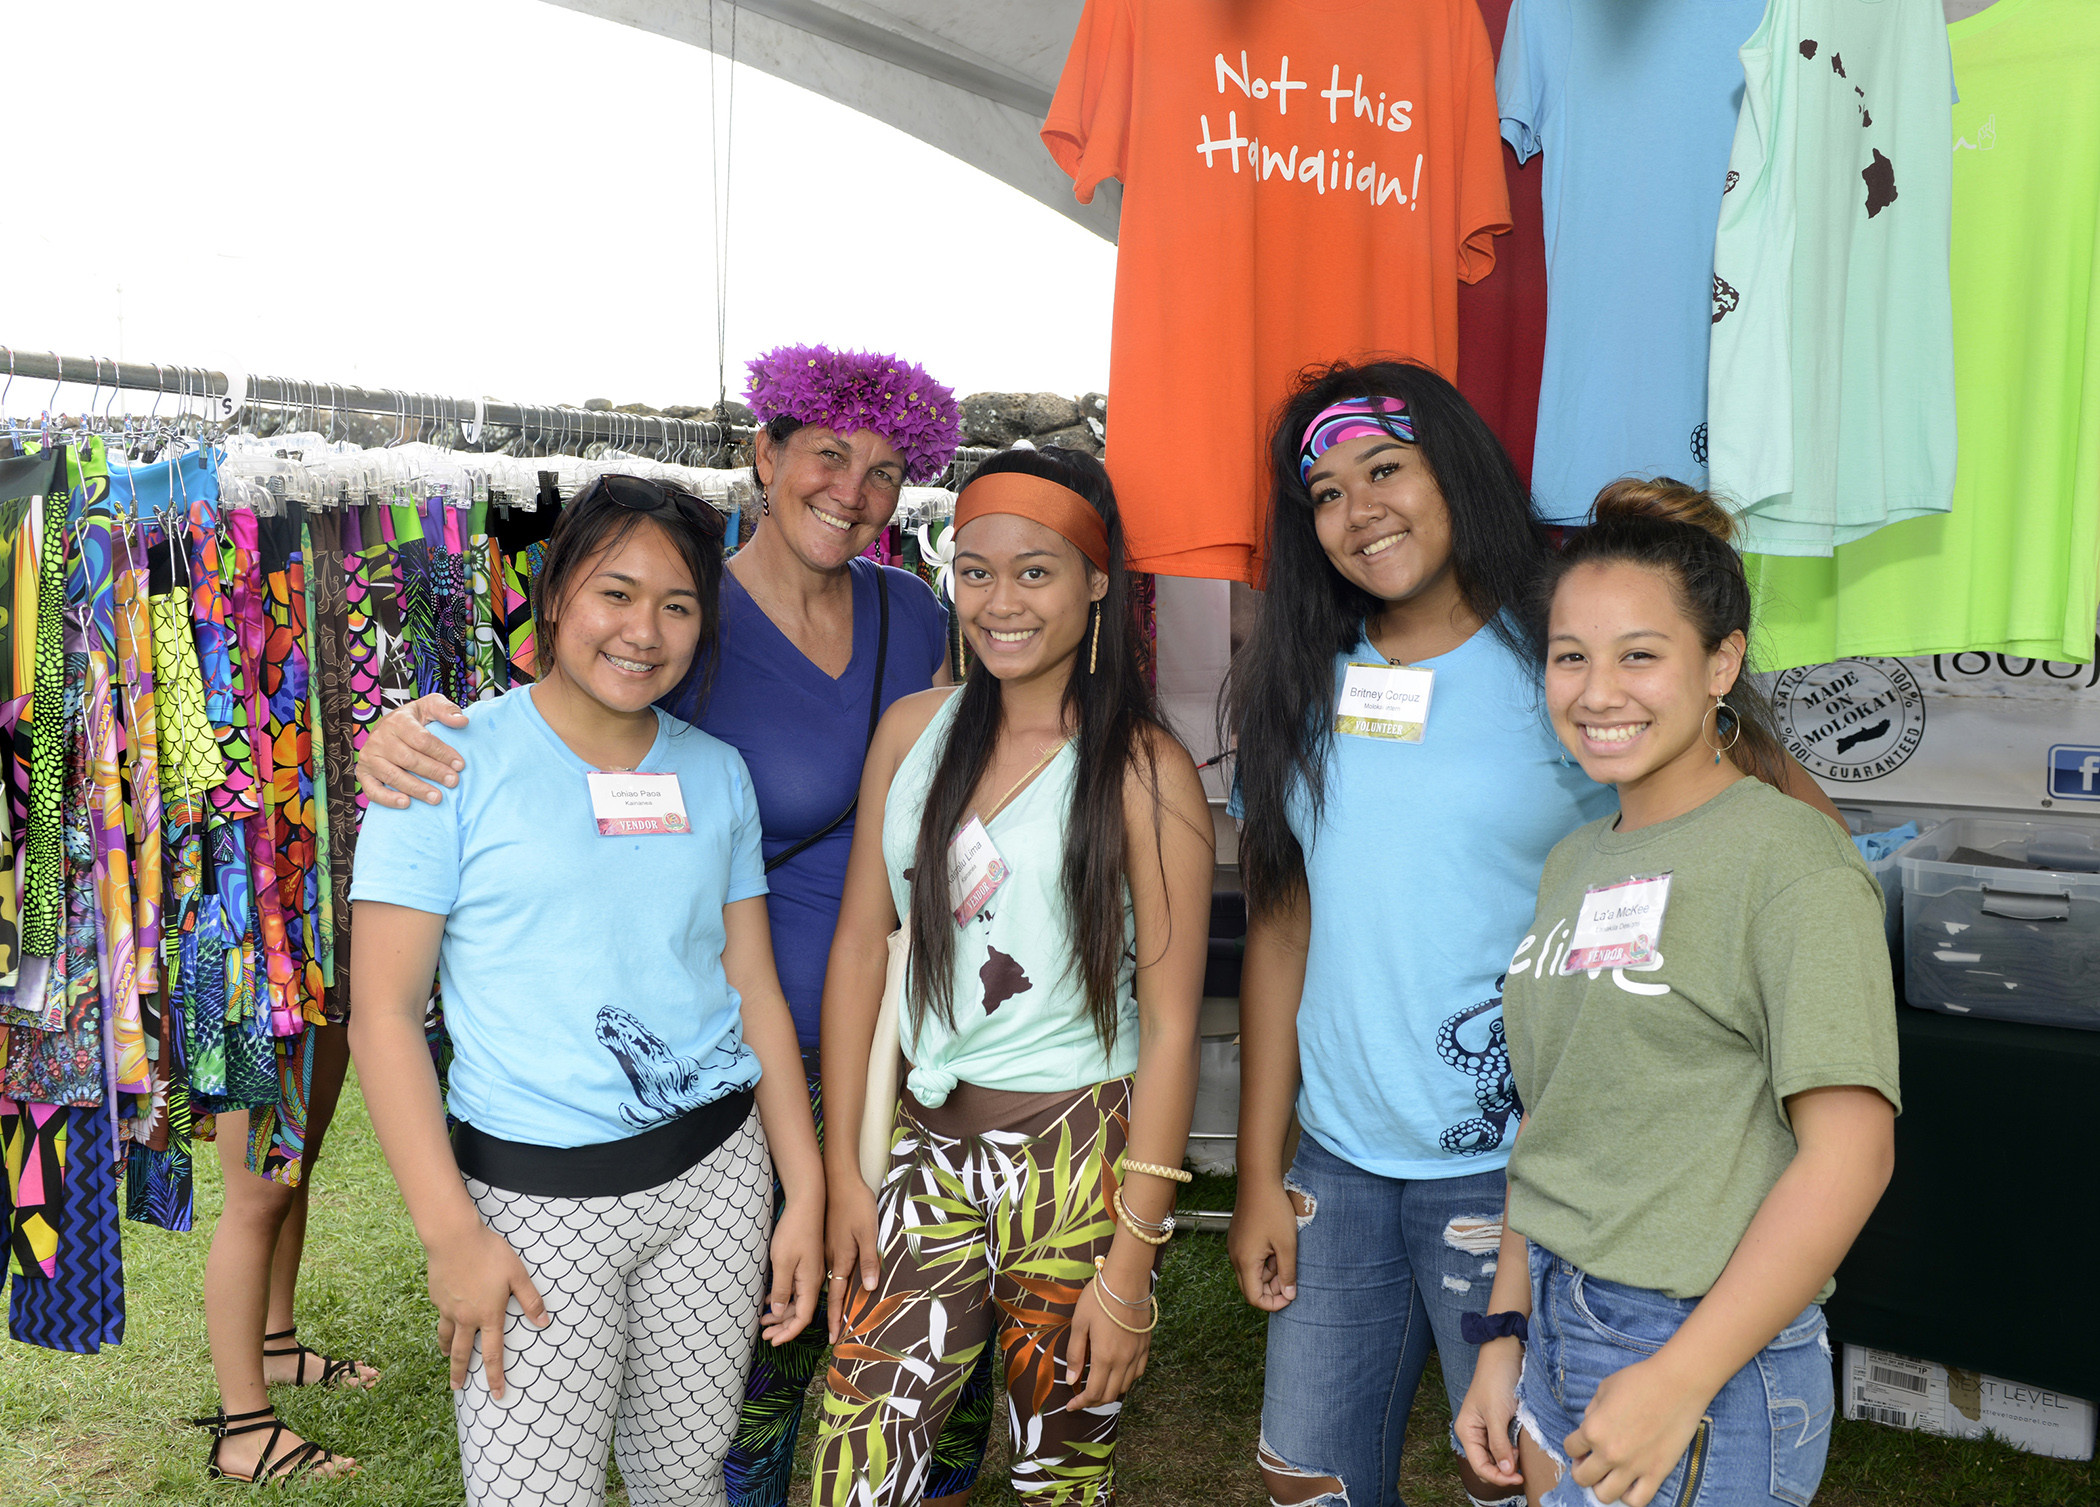 Taynia Kaholoaa of Kainanea on Molokai shared, “The festival has guided us in areas that I struggled with as a small business owner and it’s helped take my business to another level.”